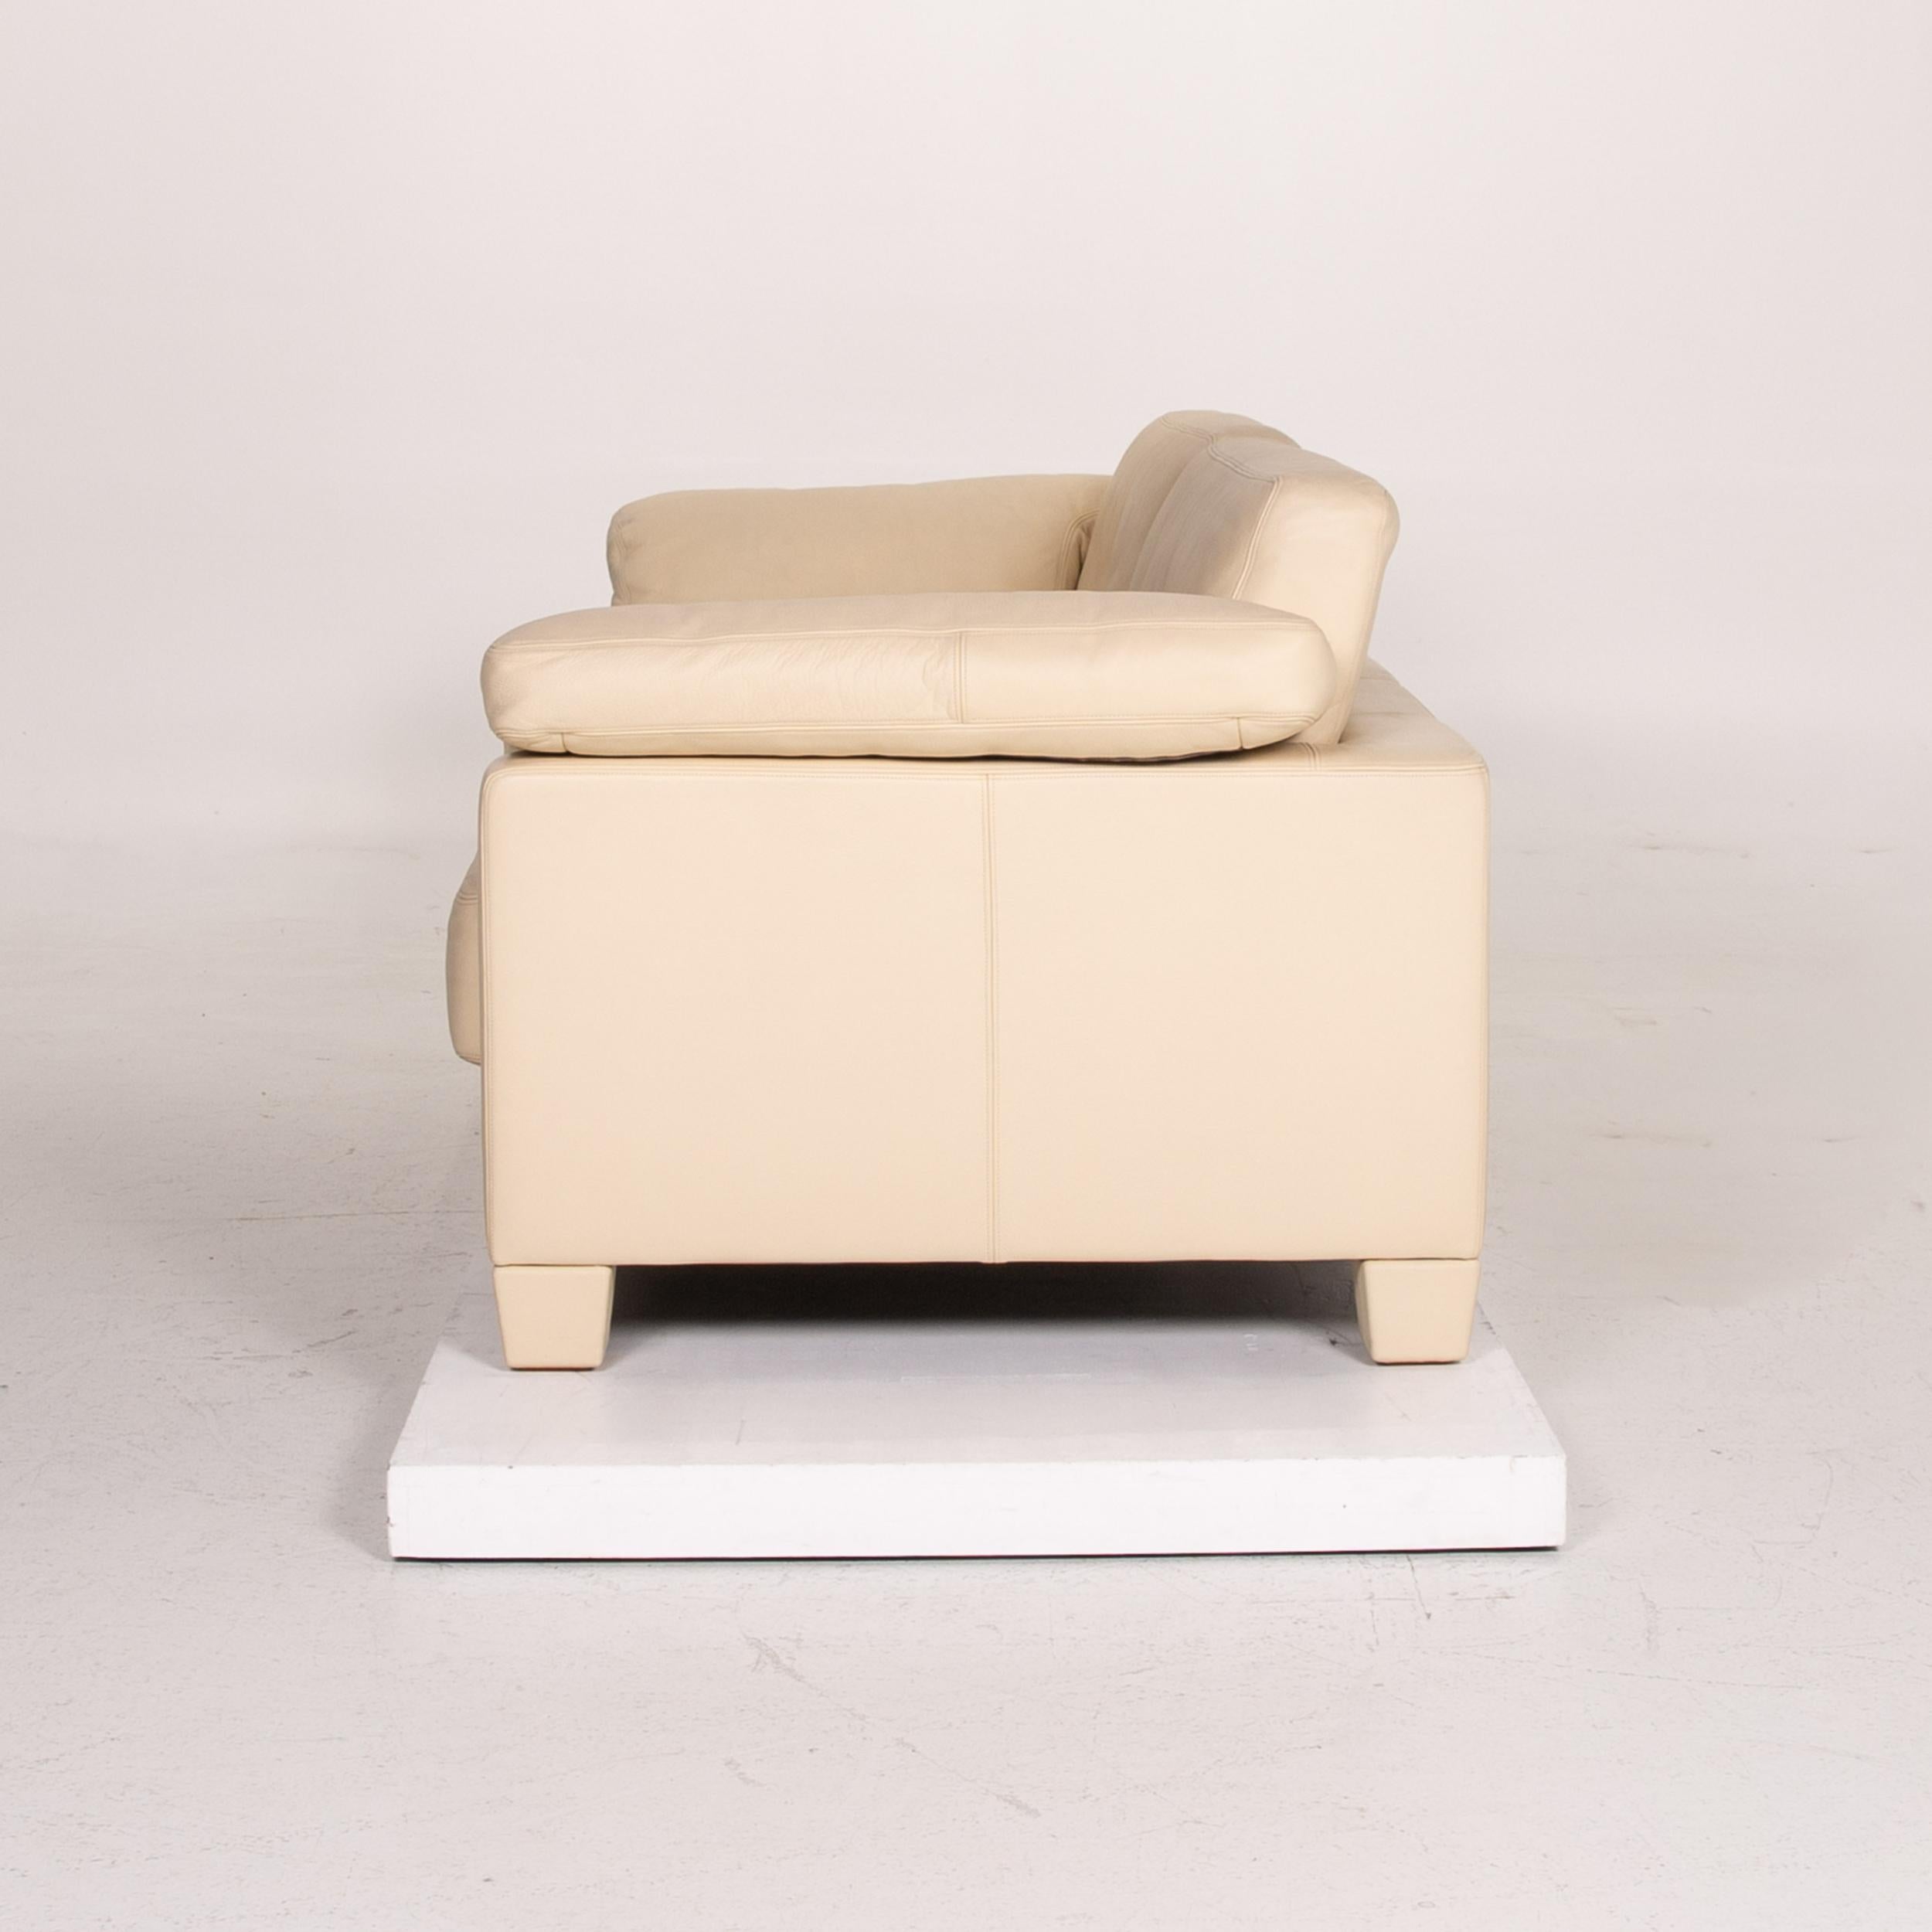 De Sede Ds 70 Leather Sofa Beige Three-Seat Couch 1